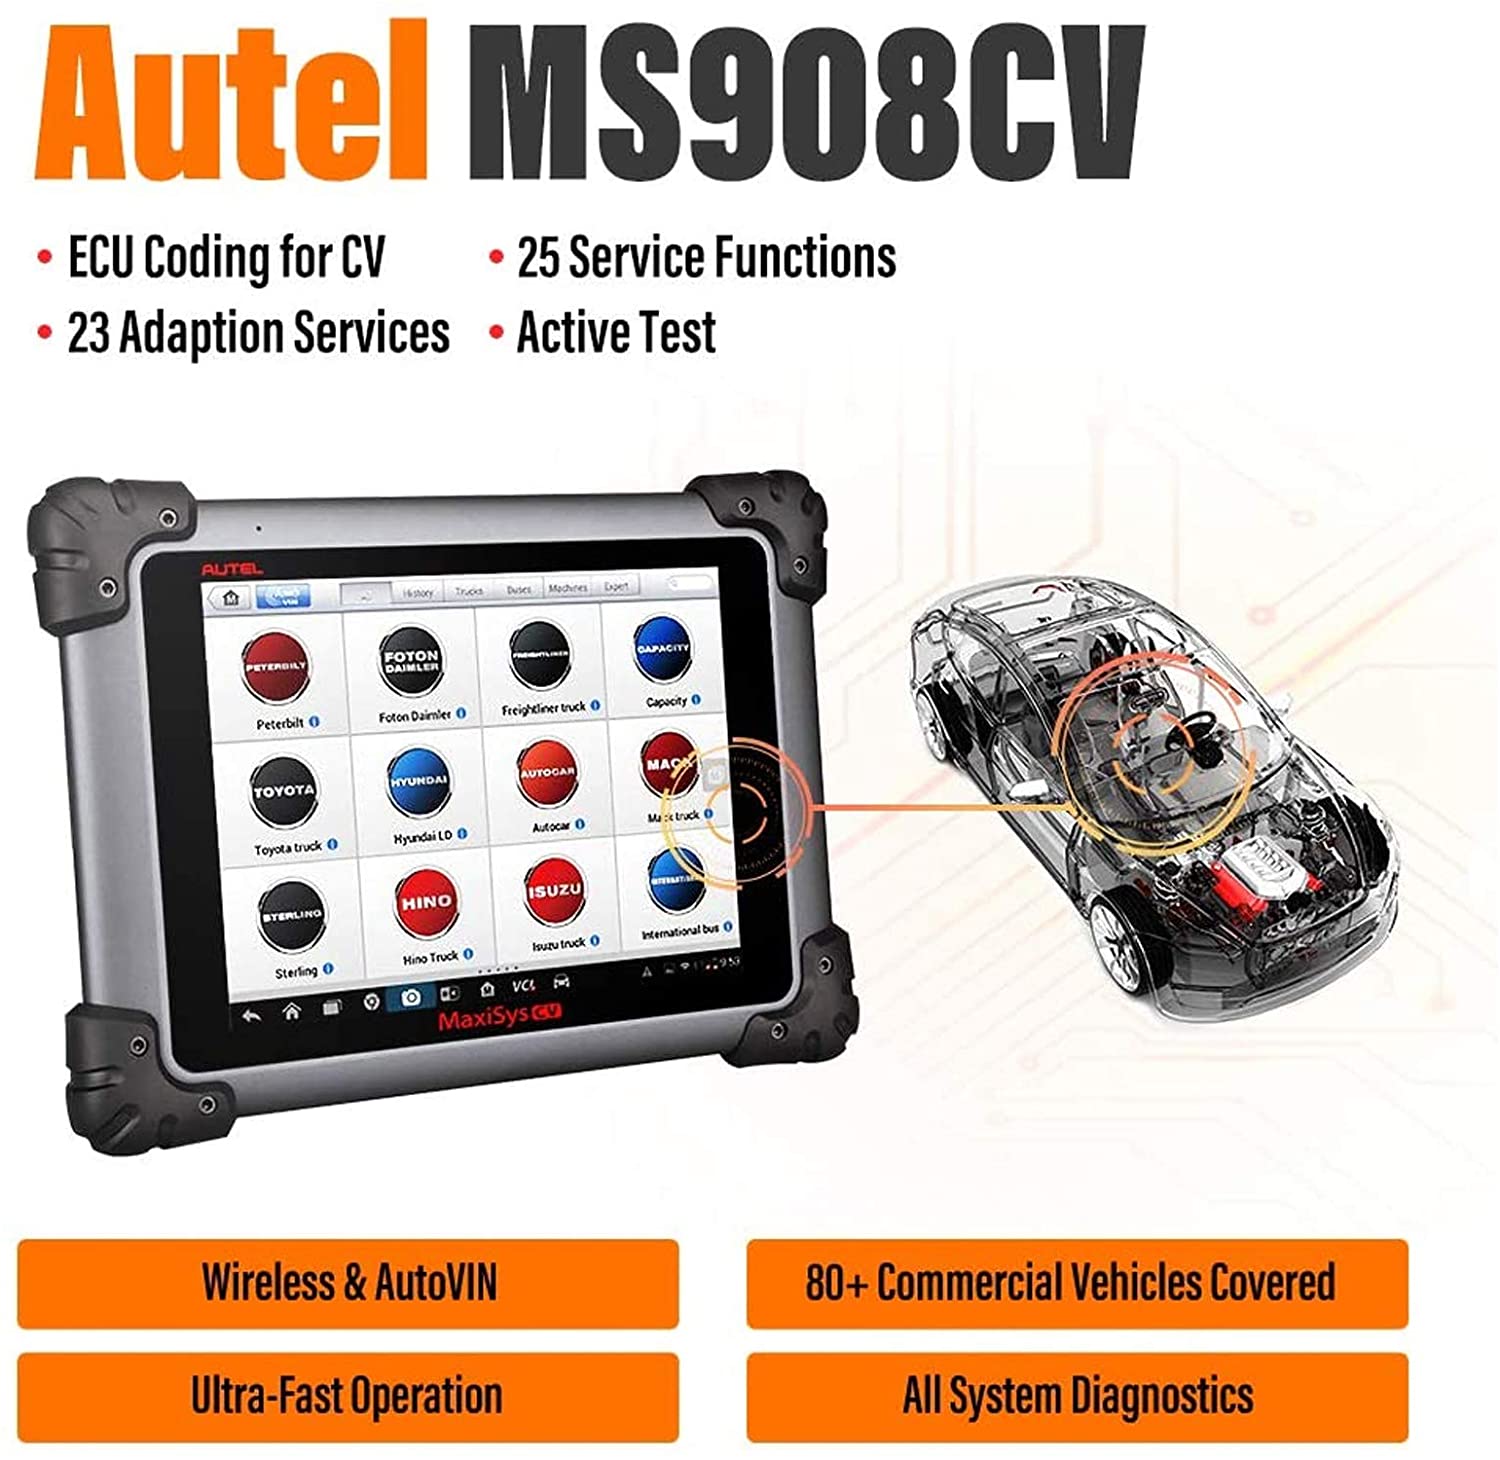 Autel MaxiSYS MS909CV Diagnostic Platform for HD and Commercial Vehicles